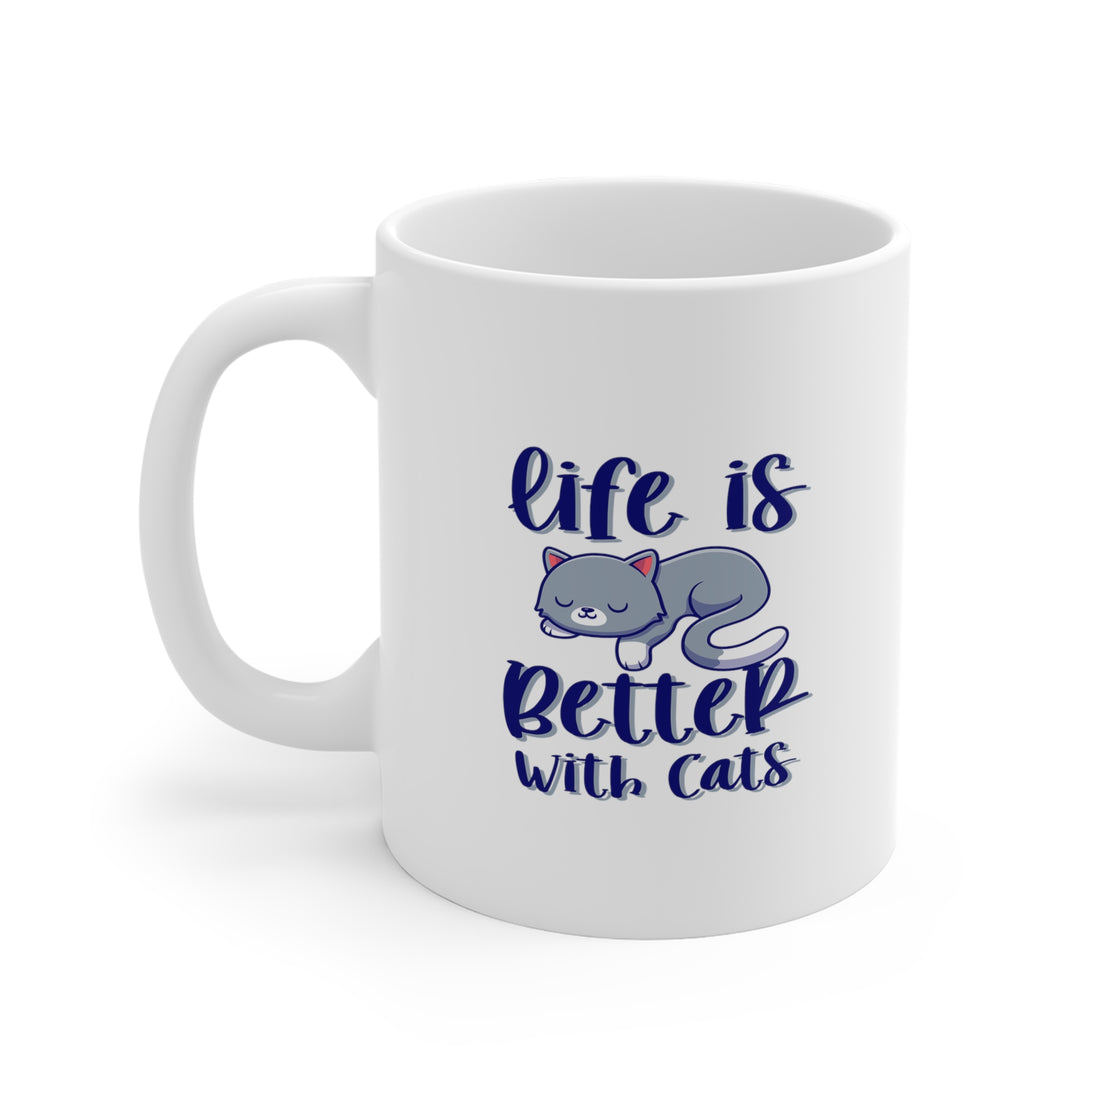 Life Is Better With Cats - White Ceramic Mug 2 sizes Available